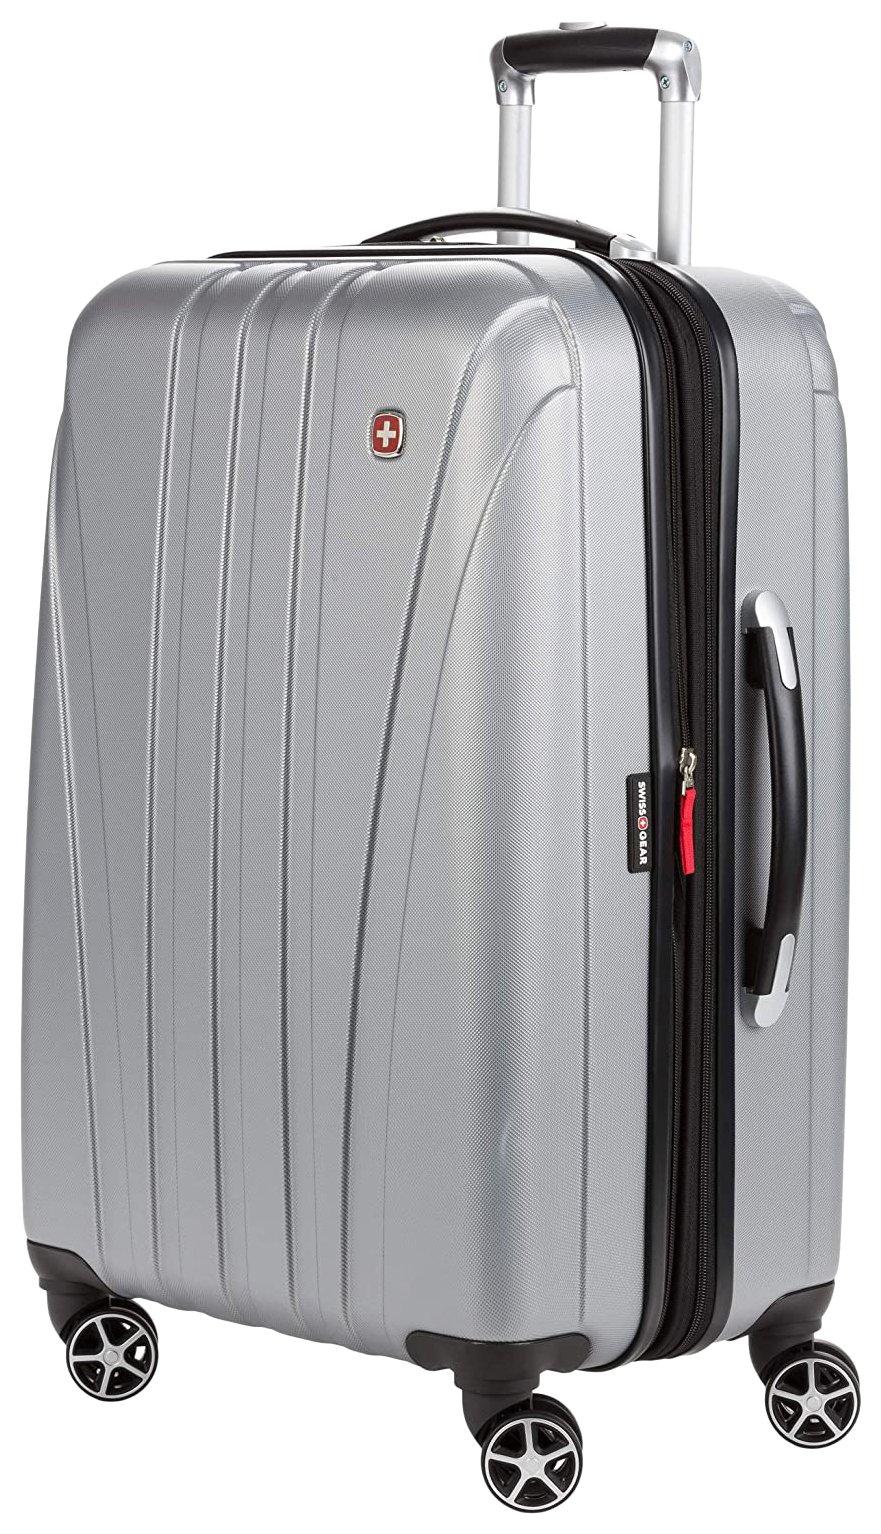 Swiss Gear 24'' Expandable Hardside Spinner Luggage